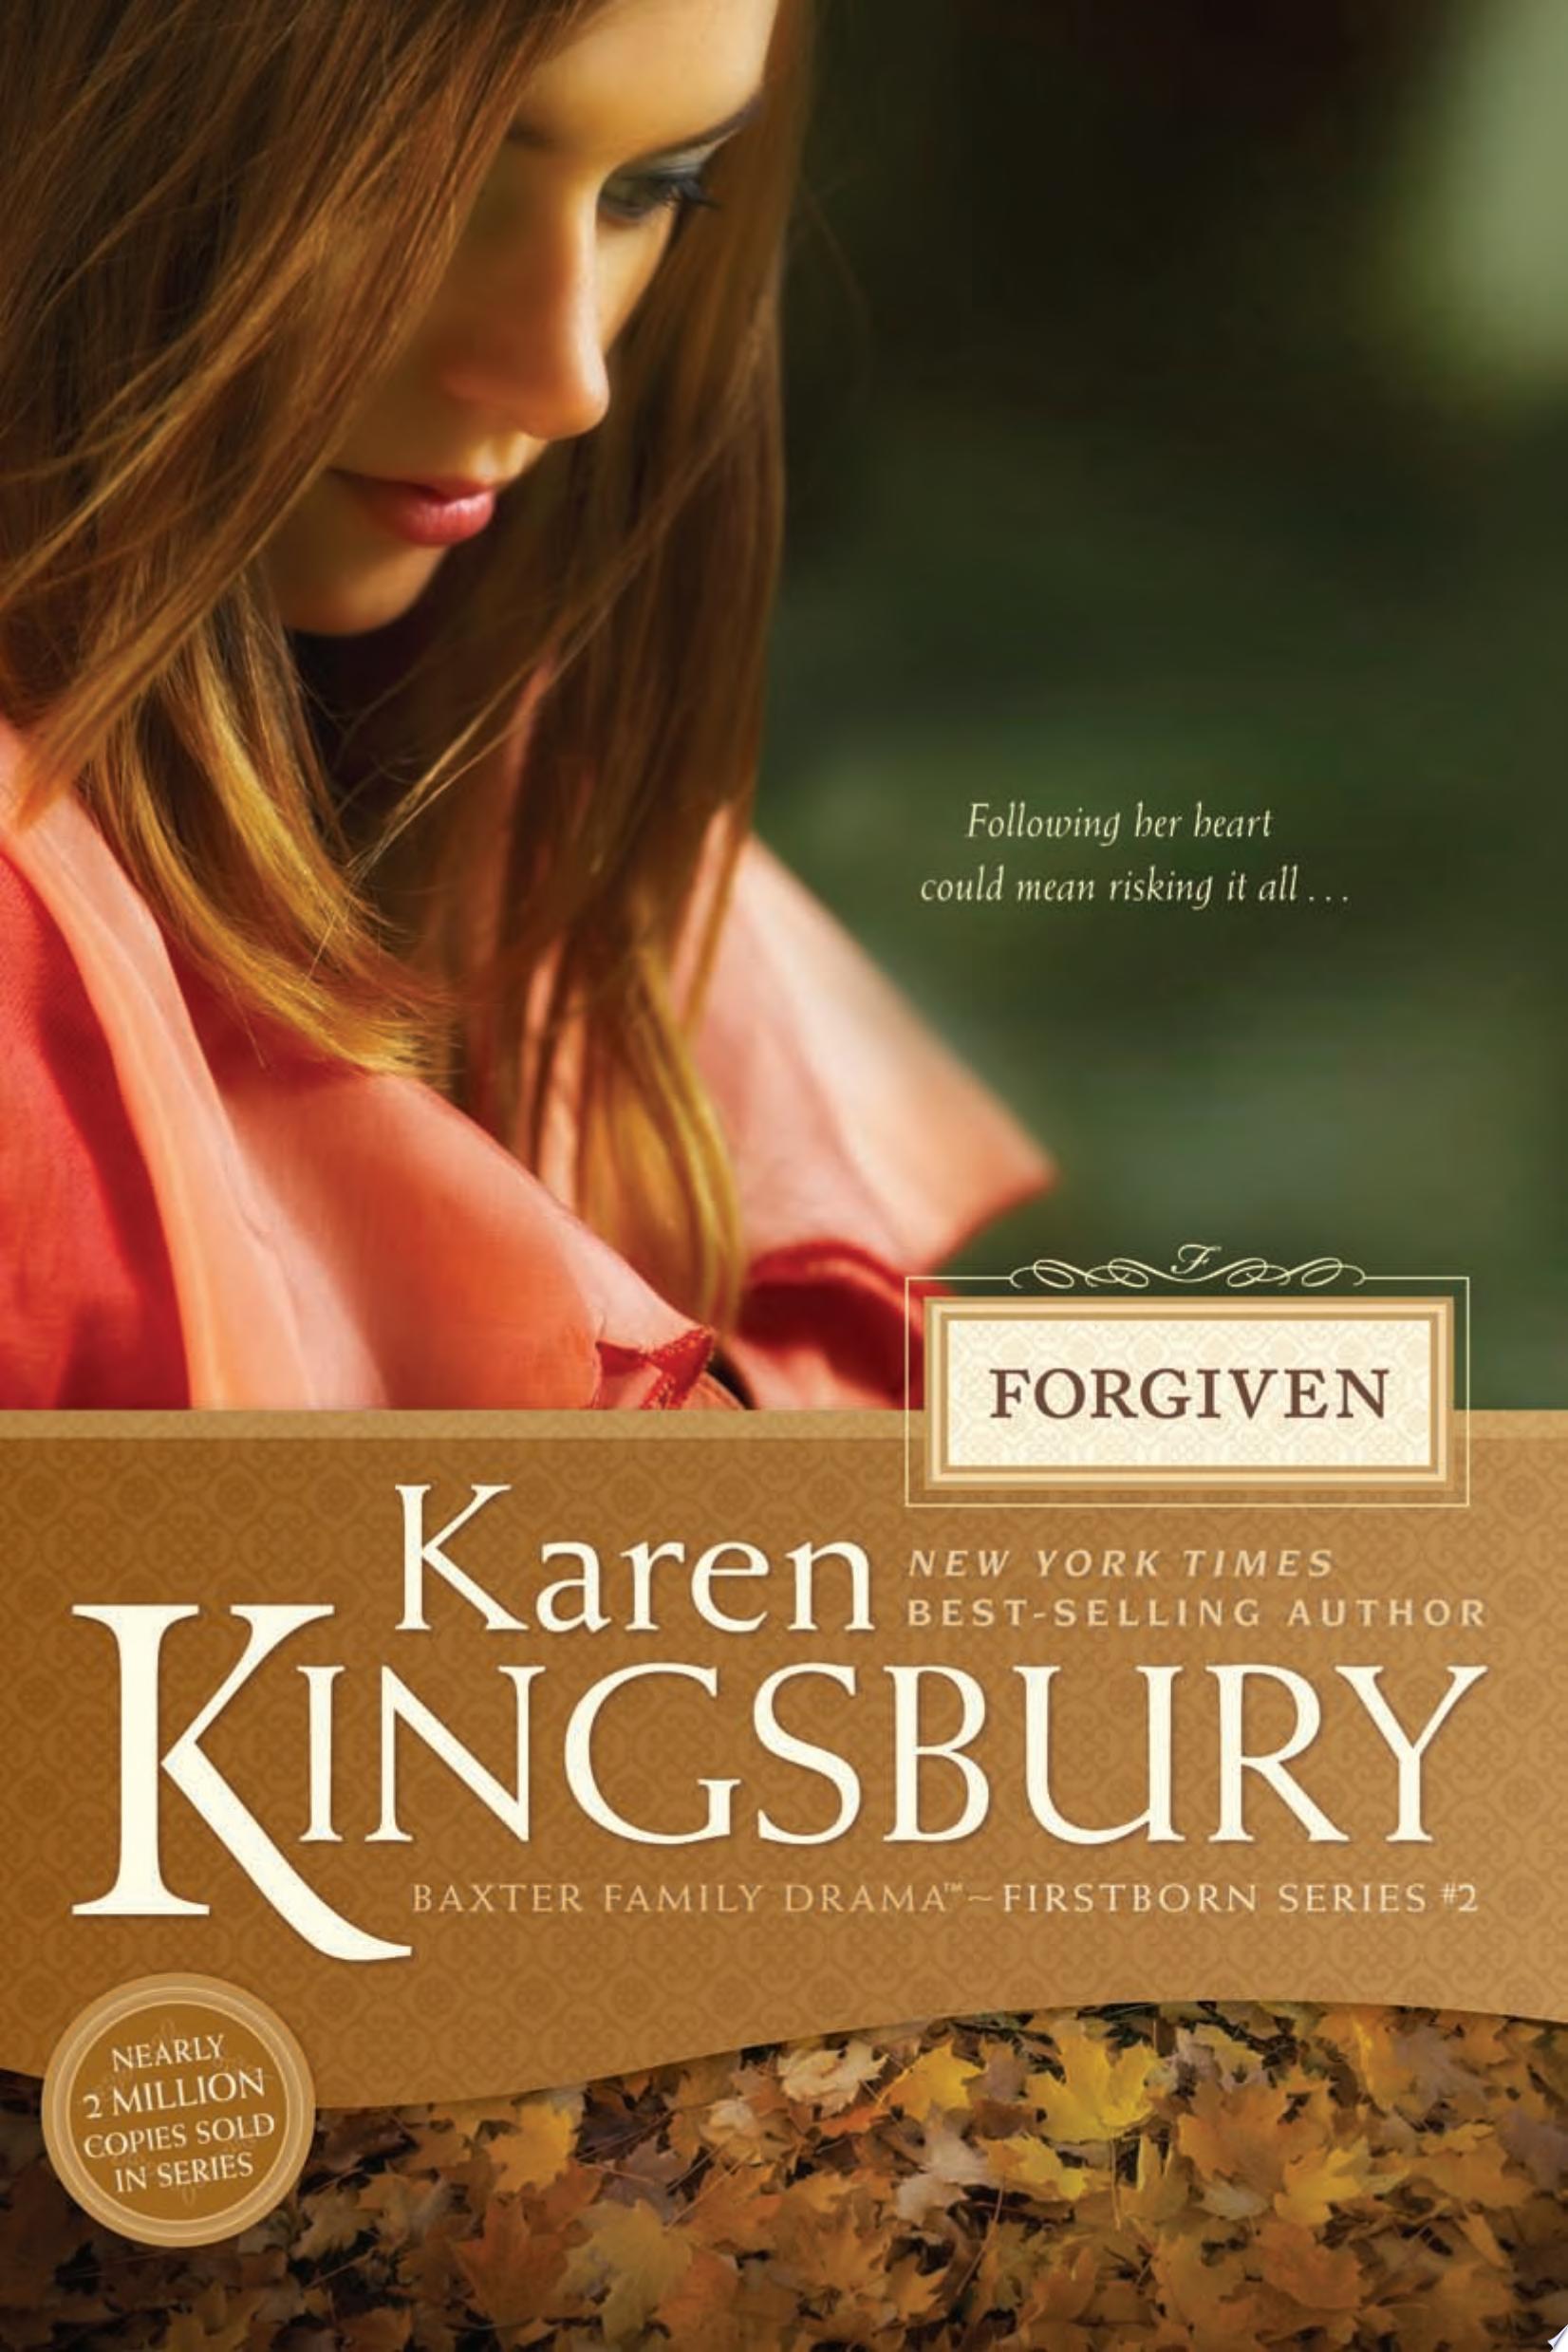 Image for "Forgiven"